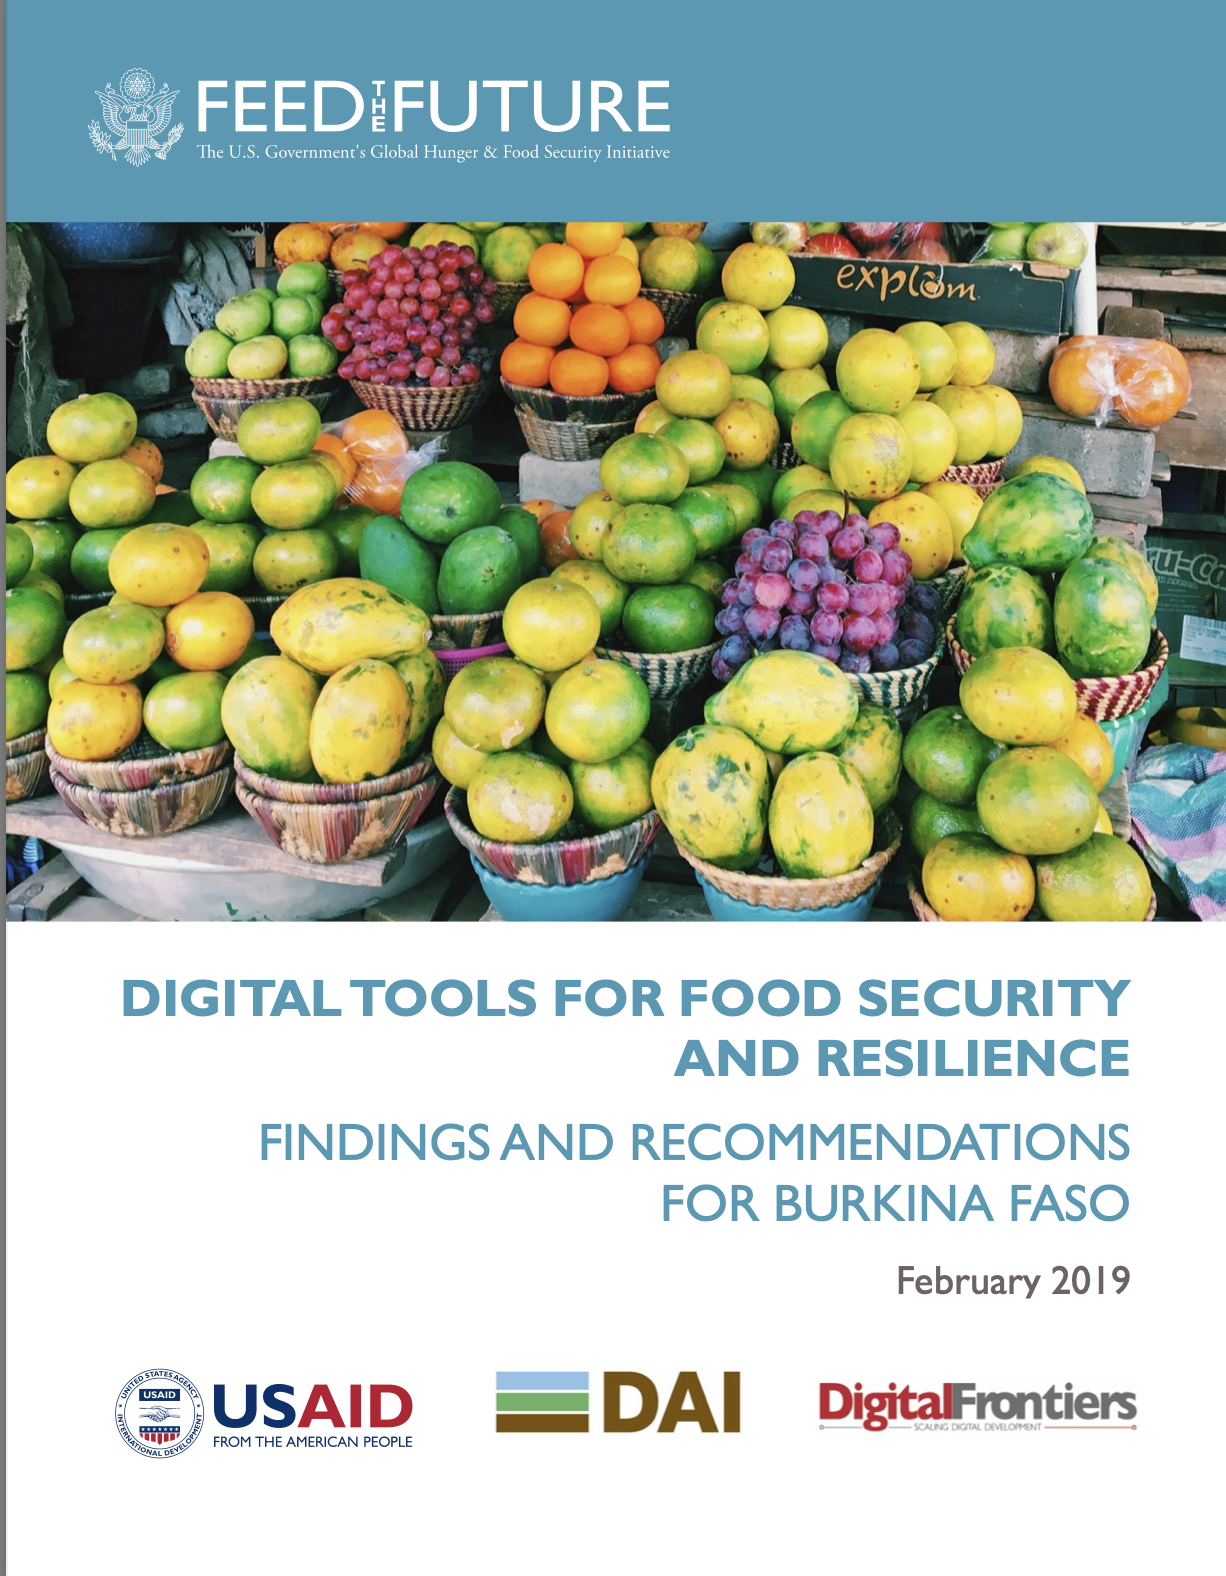 Digital Tools for Food Security and Resilience: Findings and Recommendations for Burkina Faso